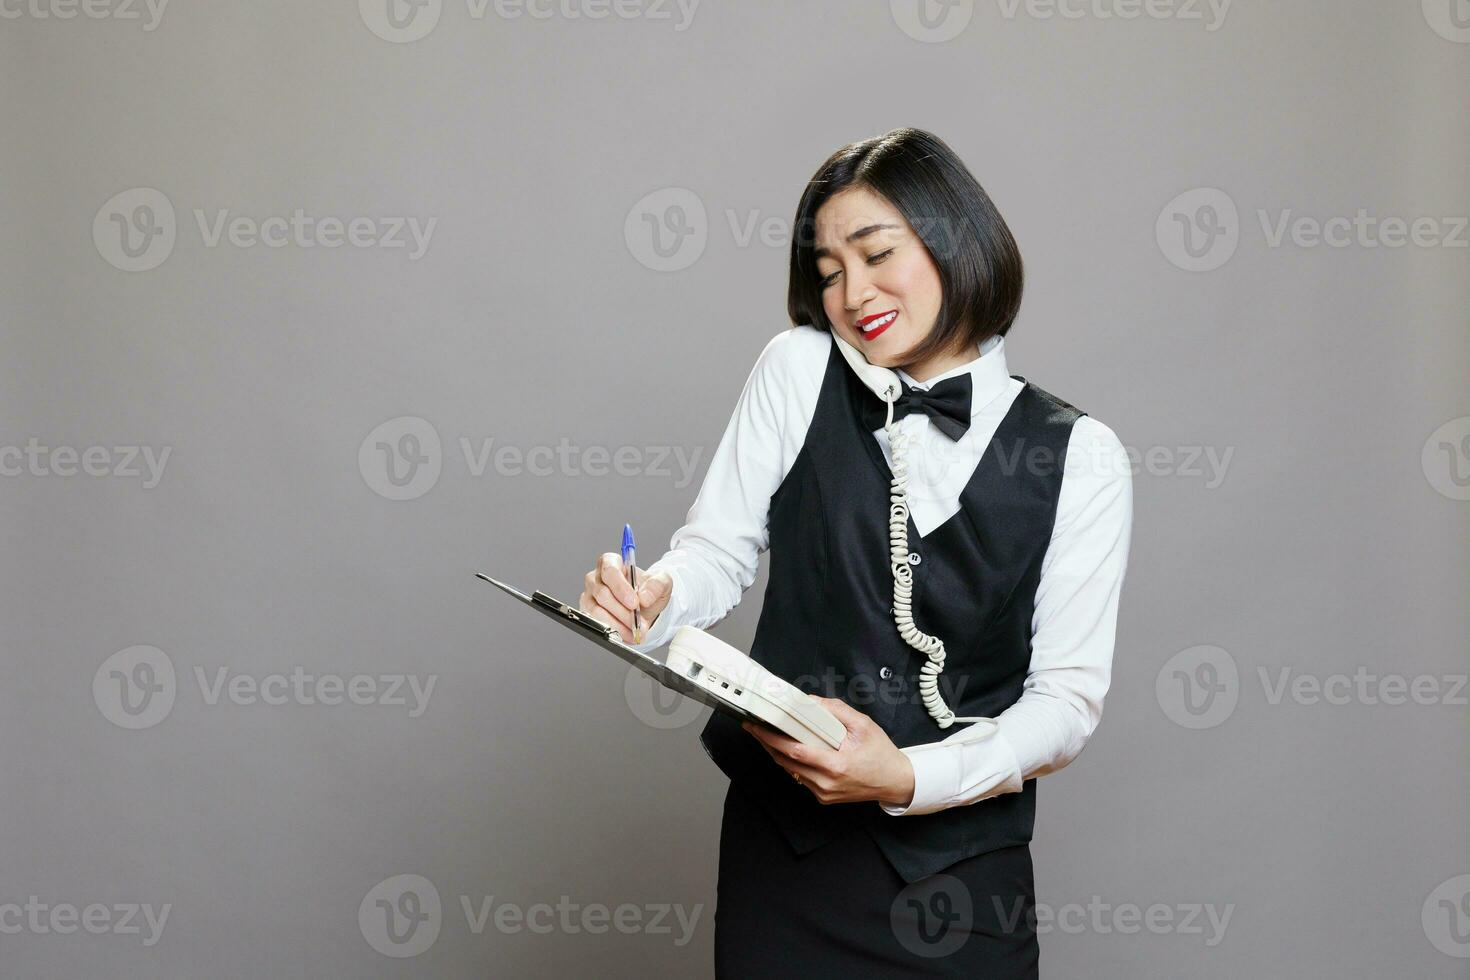 Smiling asian waitress answering landline phone call and writing on clipboard. Restaurant friendly woman employee in uniform talking with client on telephone and managing order photo